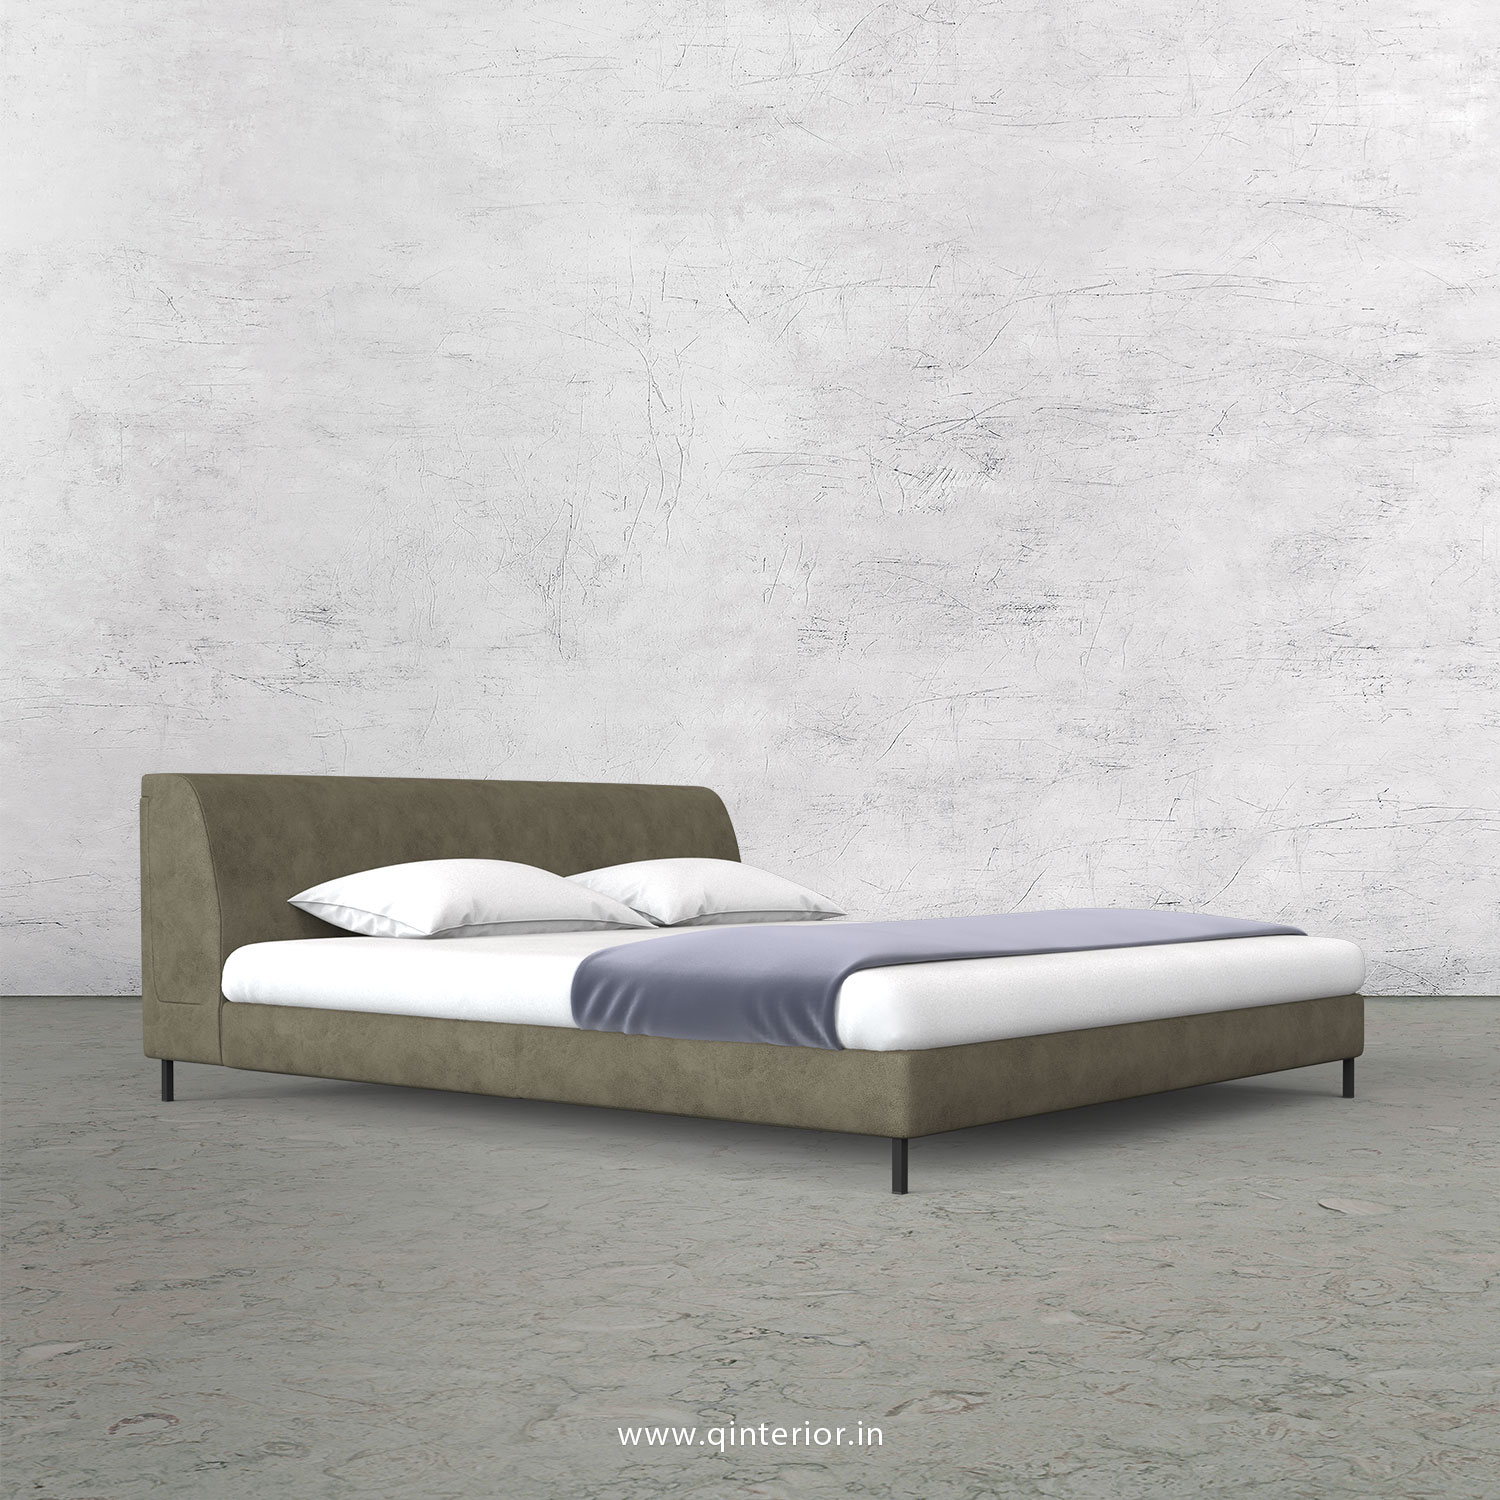 Luxura King Size Bed in Fab Leather Fabric - KBD003 FL03